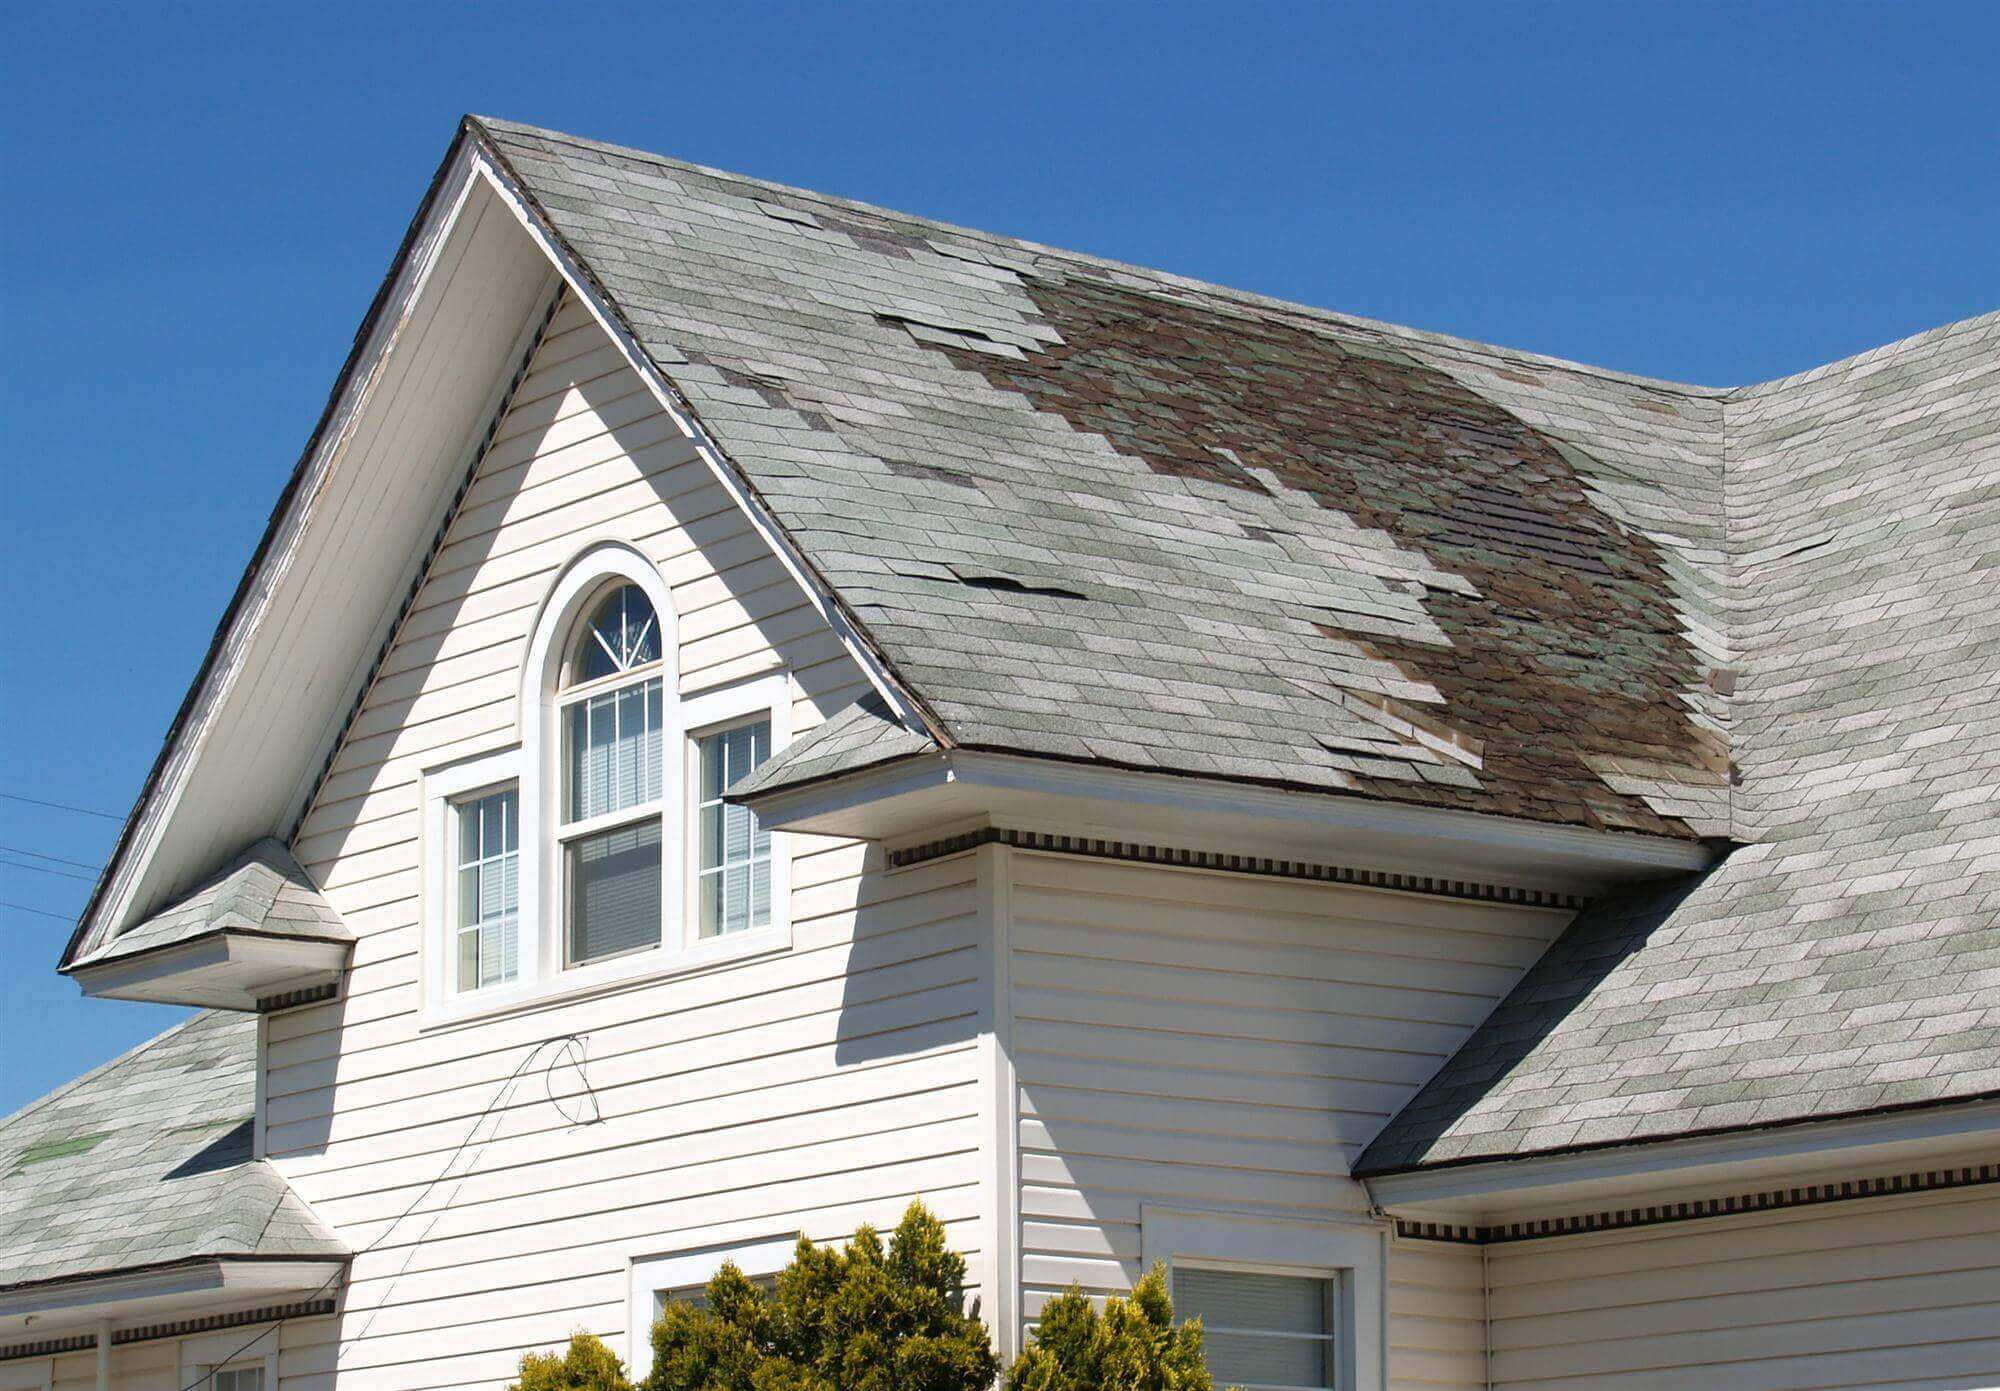 Damaged Roof with missing shingles in Green Bay, Wisconsin